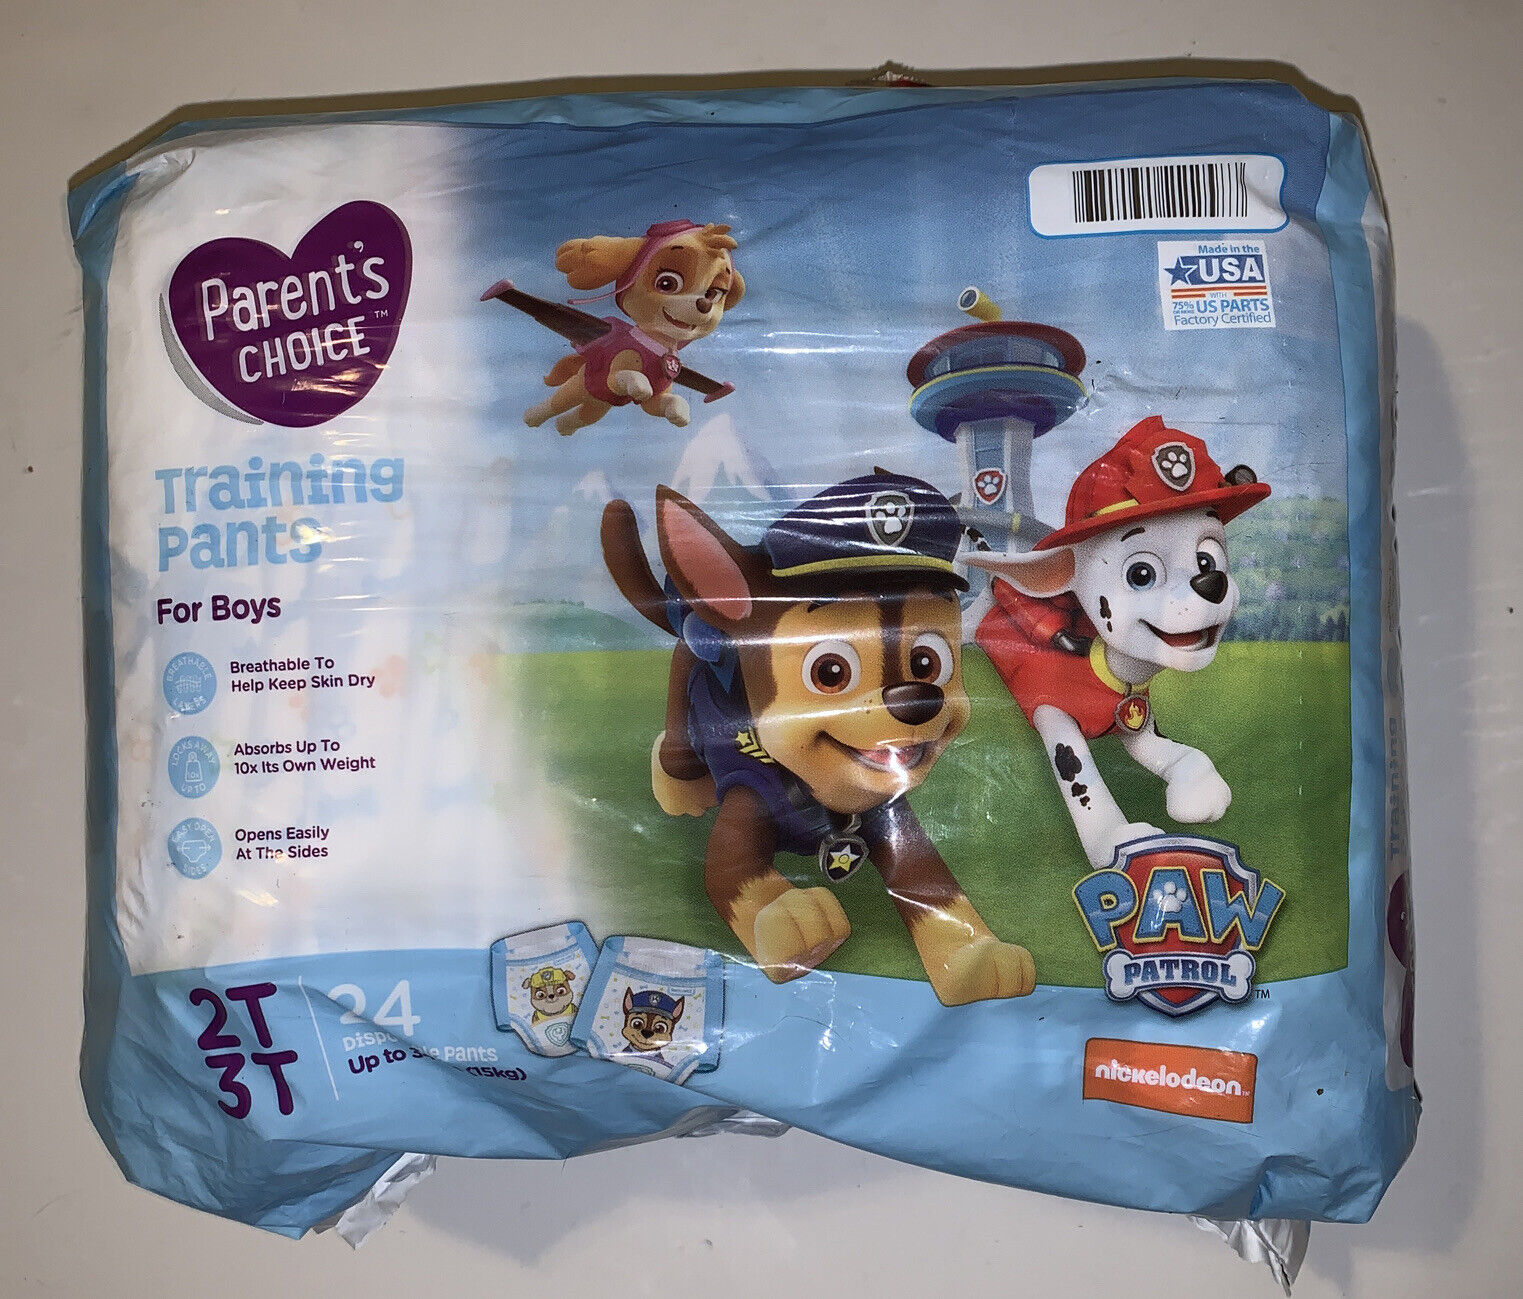 PAW Patrol training pants references (Boys) 2.0 by